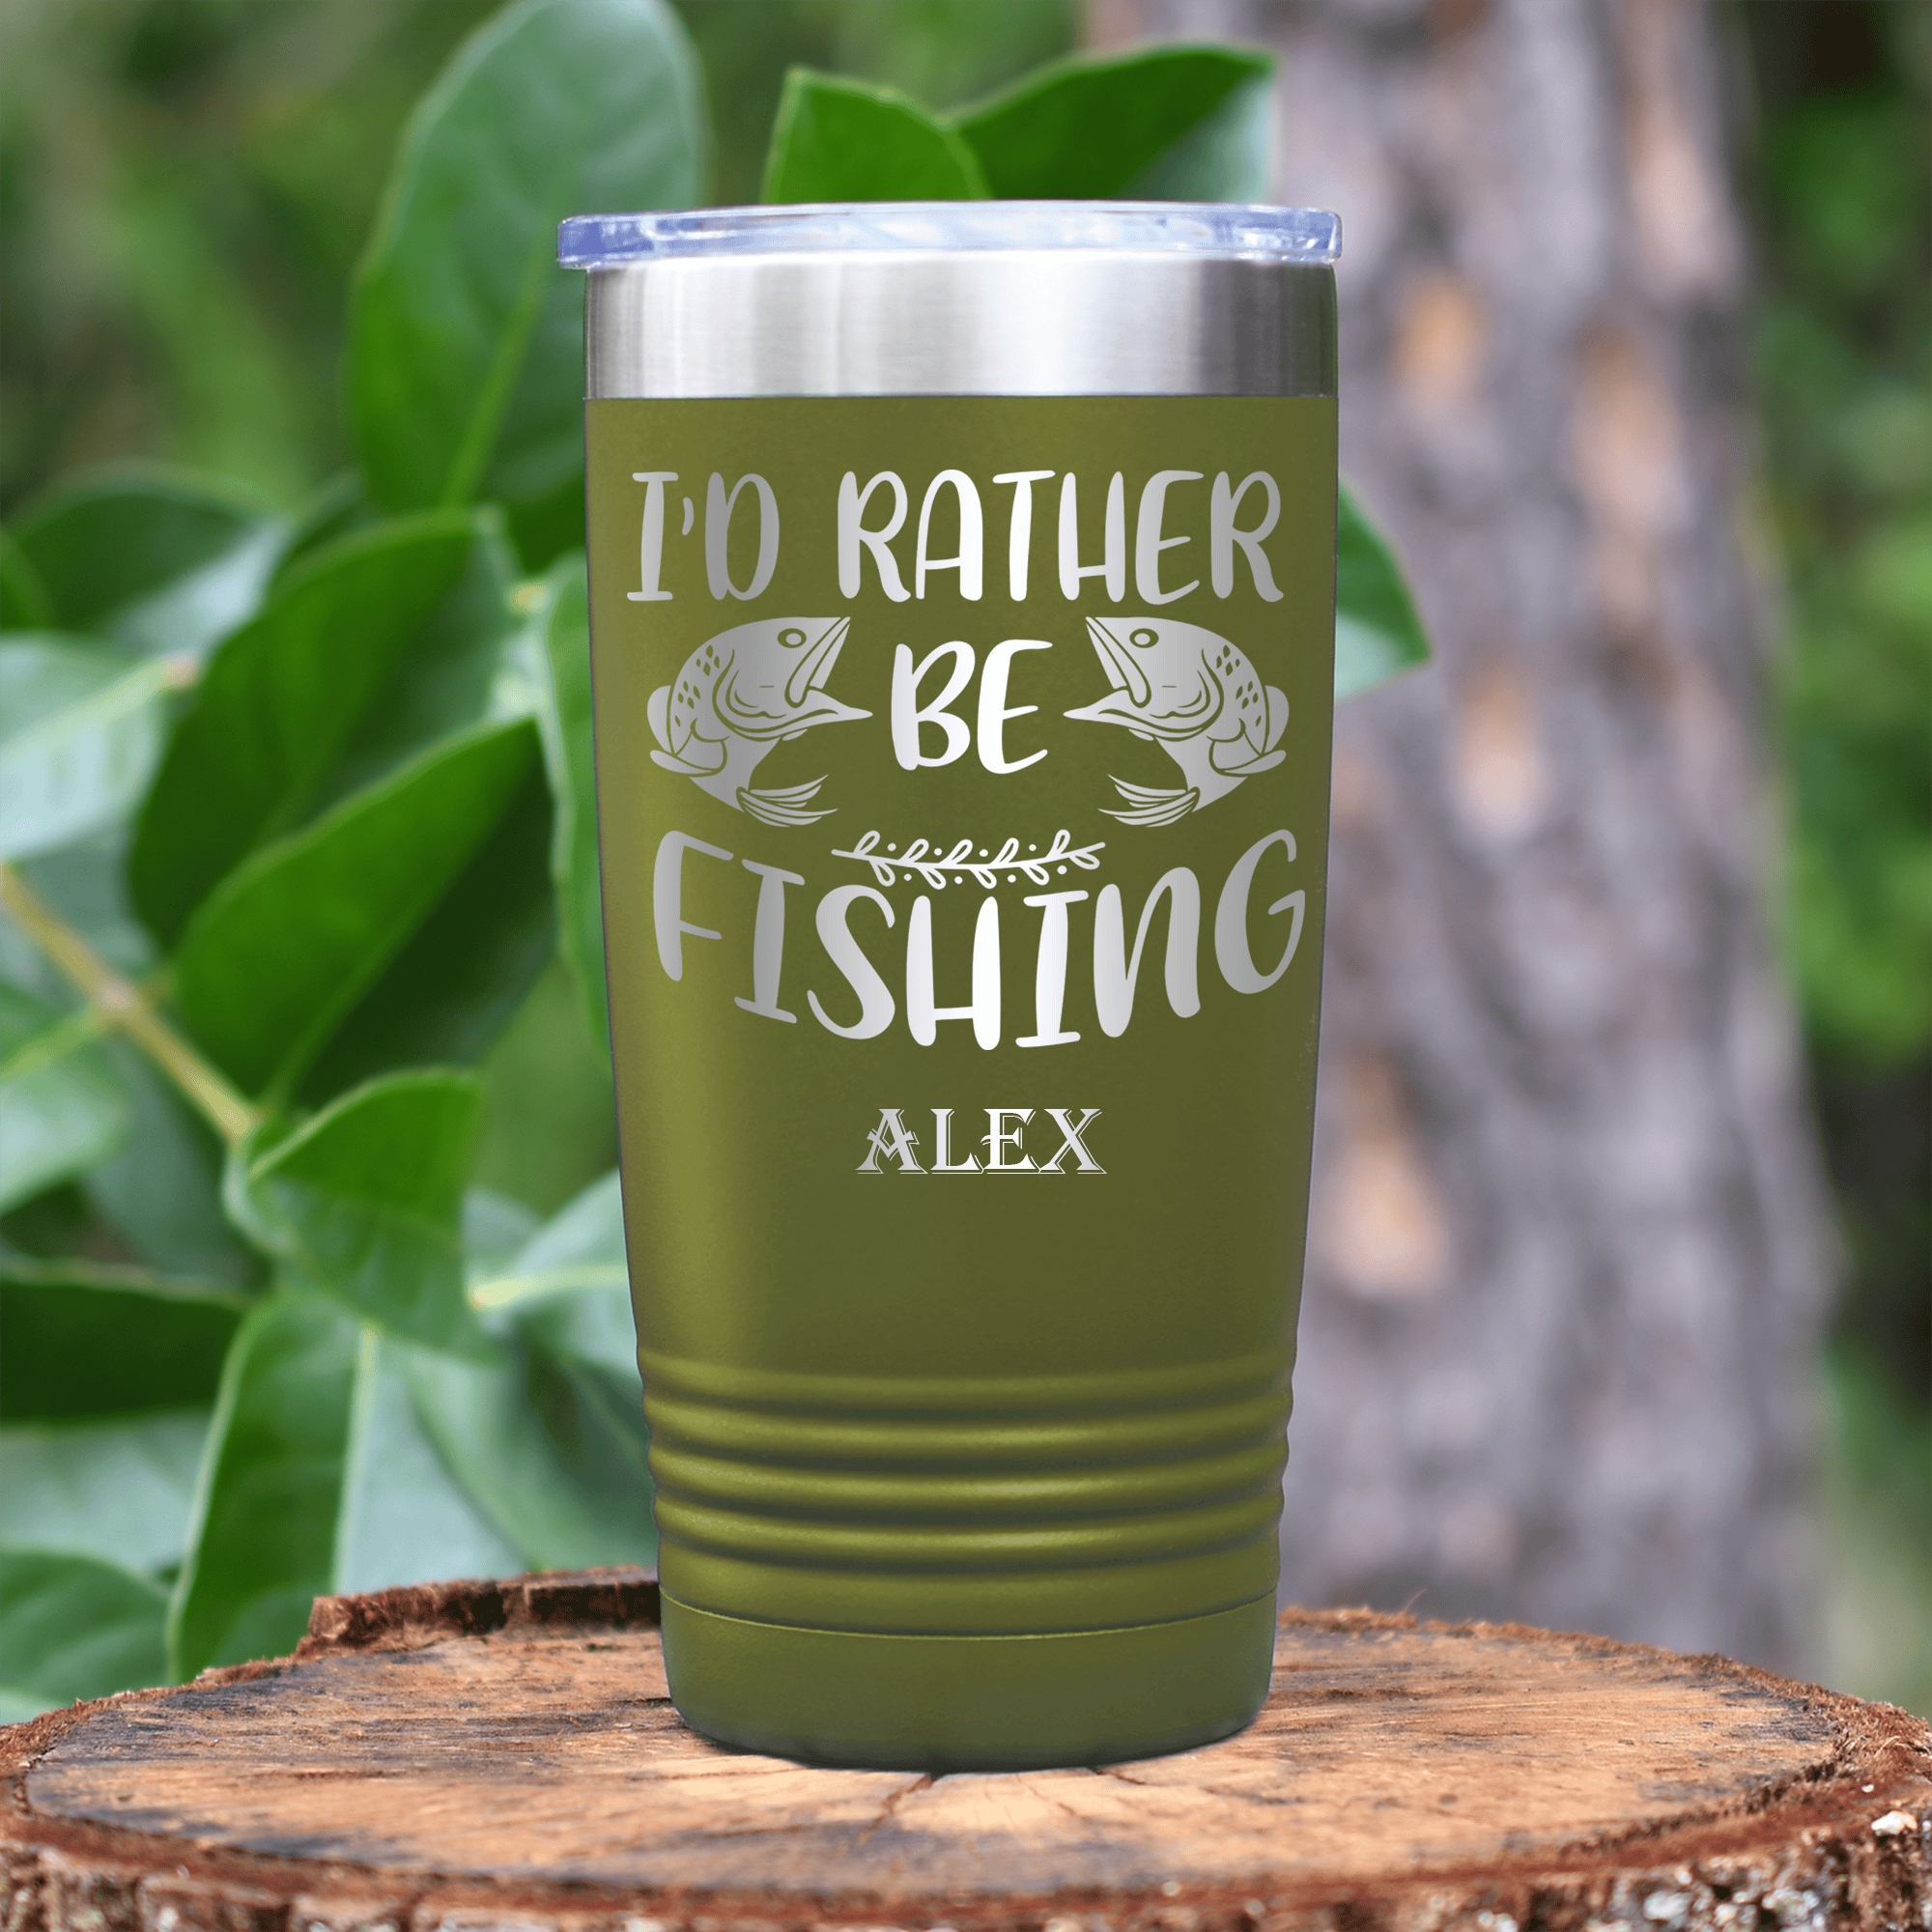 Funny Fishing Lures Mug Made Me Do It Gift Idea For Hobby Lover